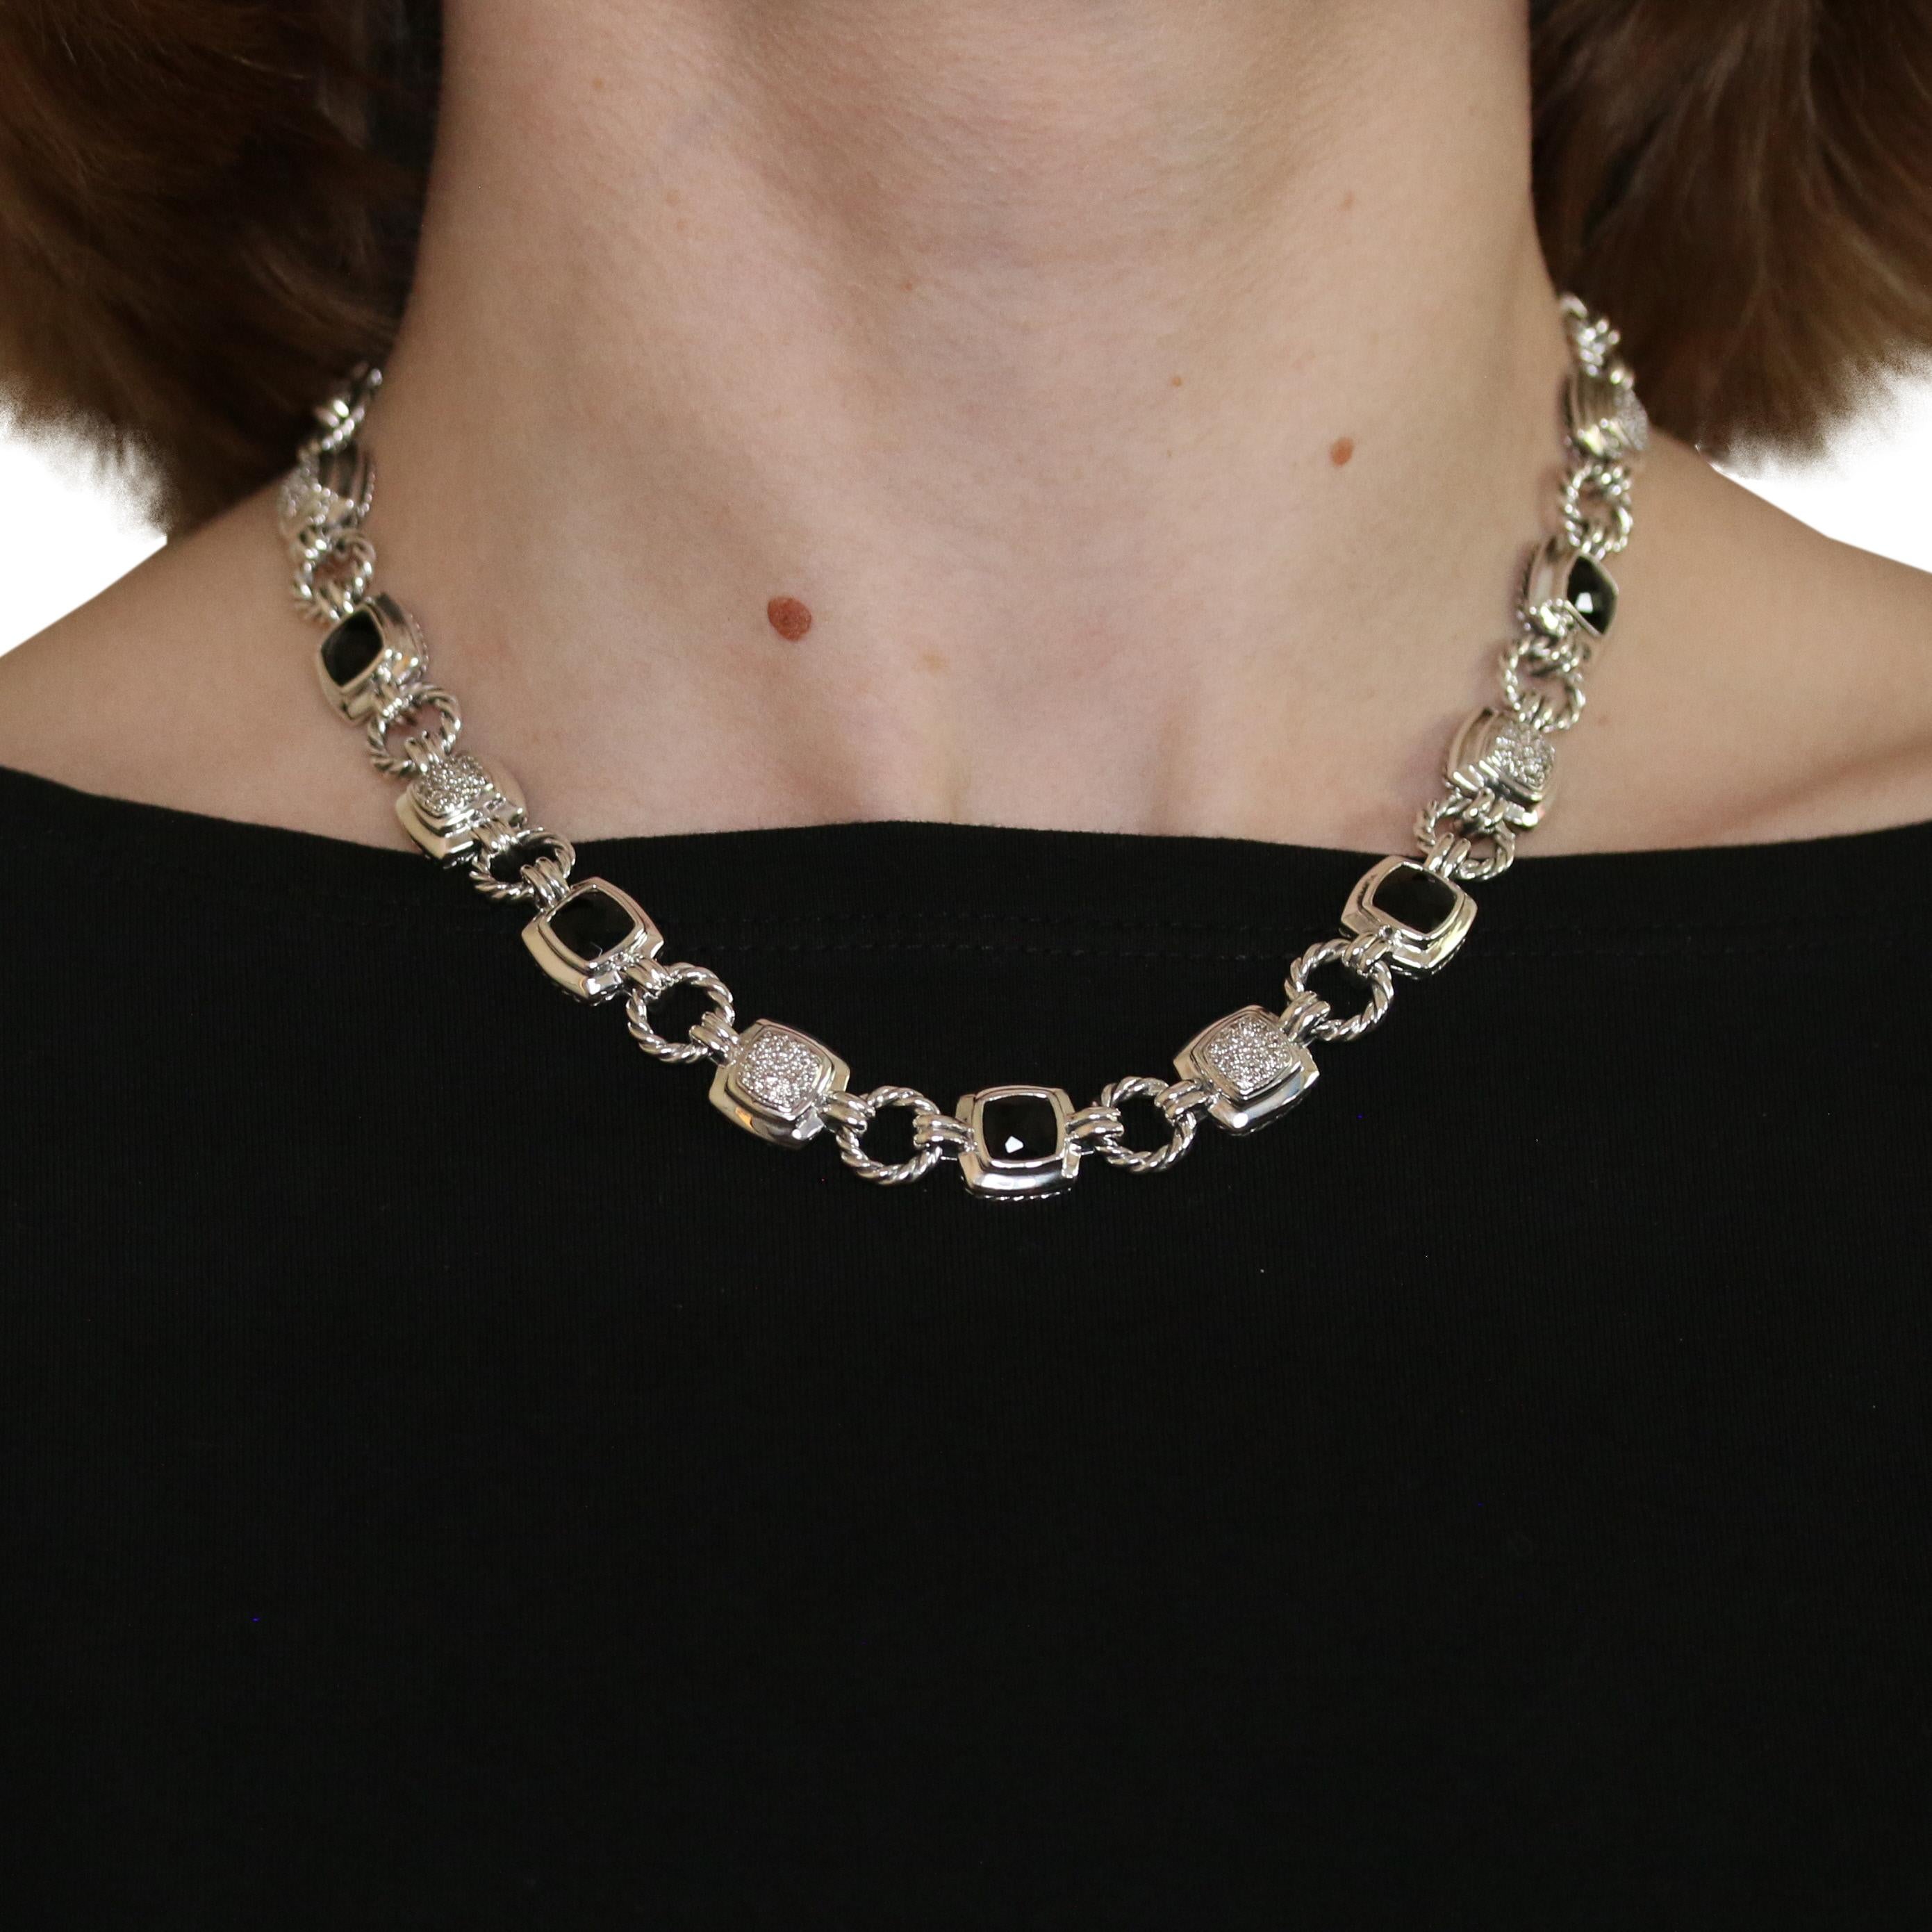 Originally retailing for $3150, this elegant designer necklace is being offered here for a much more wallet-friendly price.  

Brand: David Yurman
Collection: Renaissance 

Metal Content: Guaranteed Sterling Silver as stamped

Stone Information: